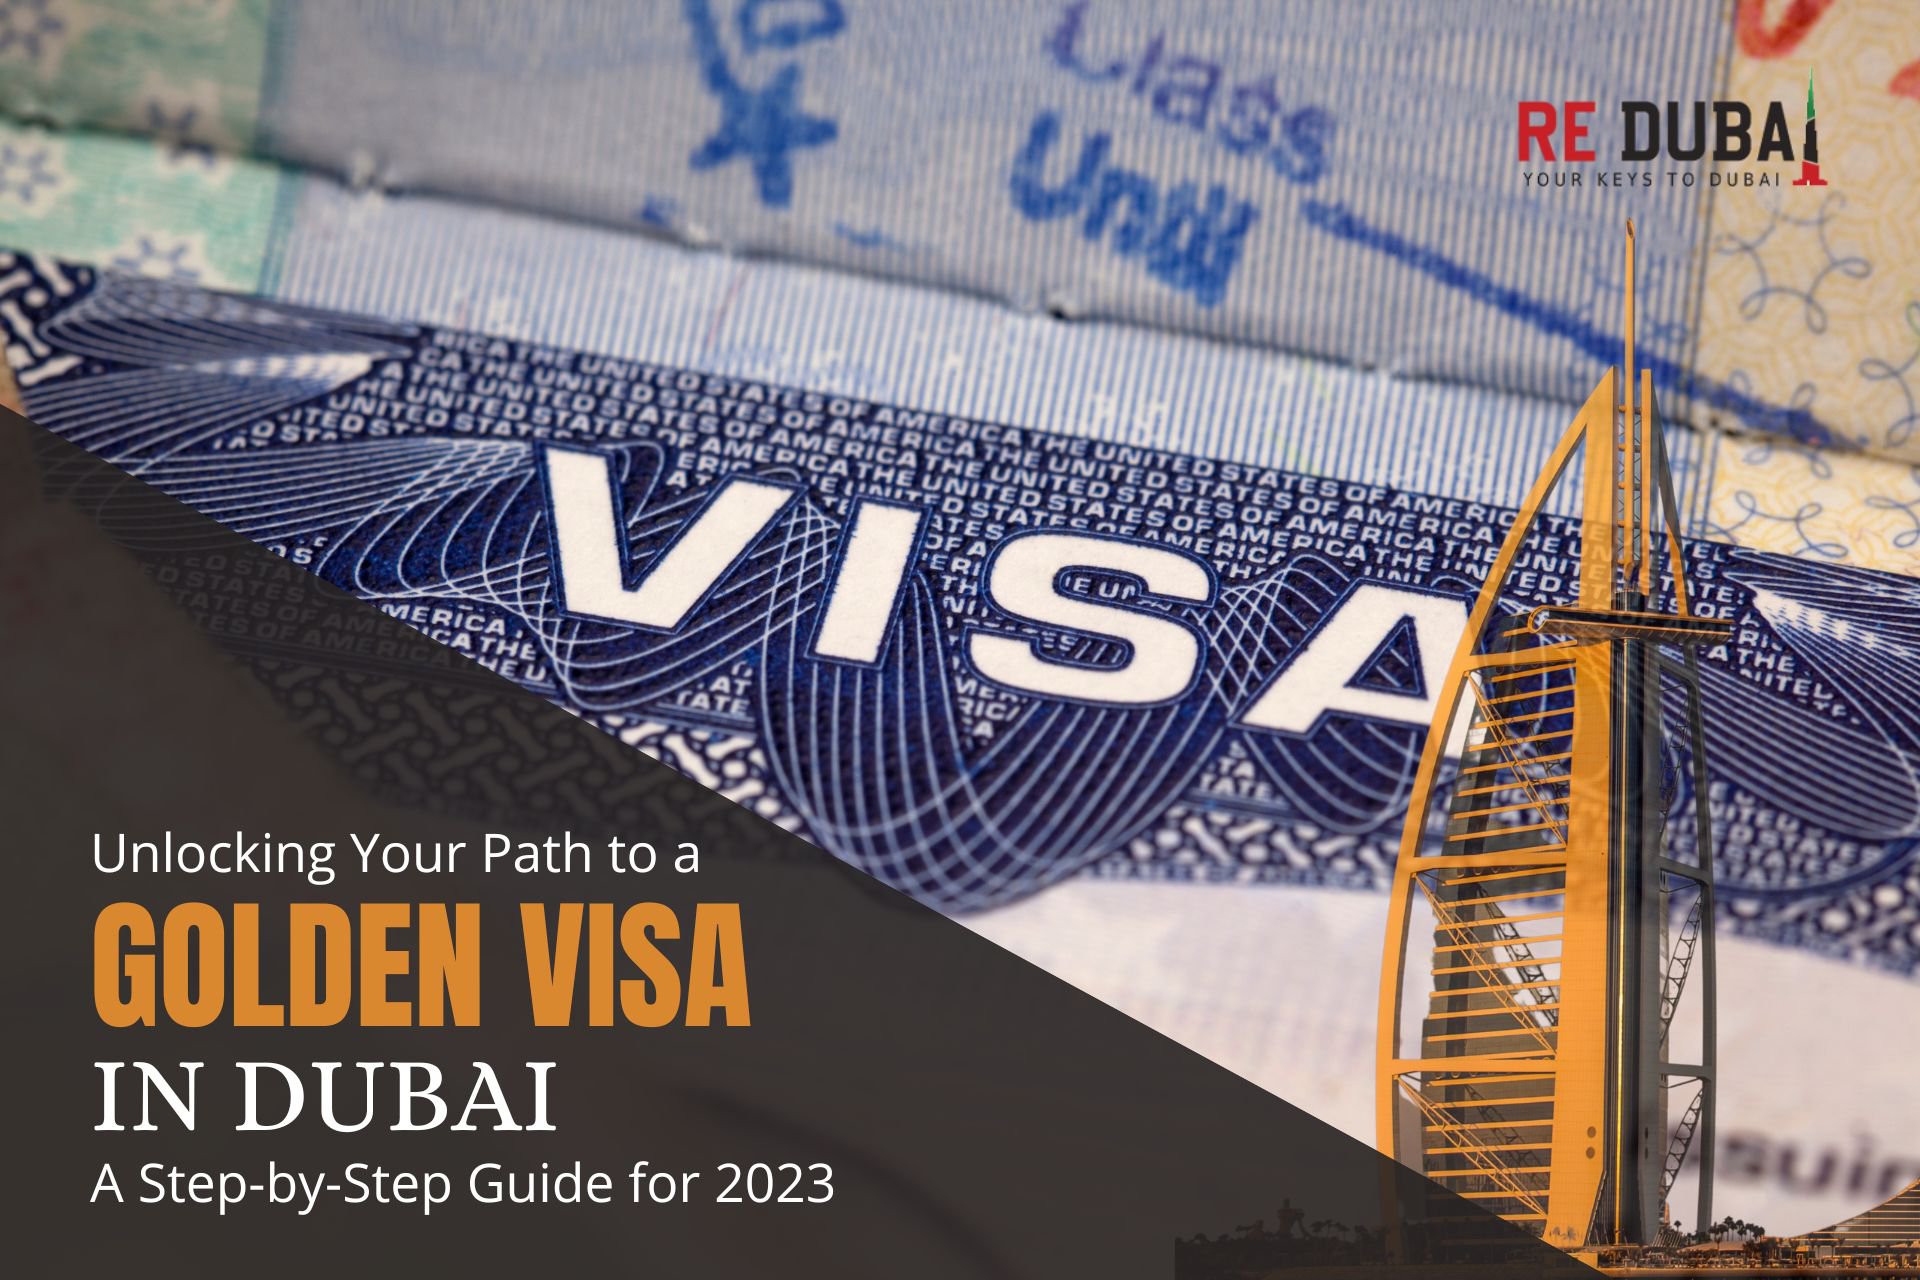 Unlocking Your Path to a Golden Visa in Dubai: A Step-by-Step Guide for 2023